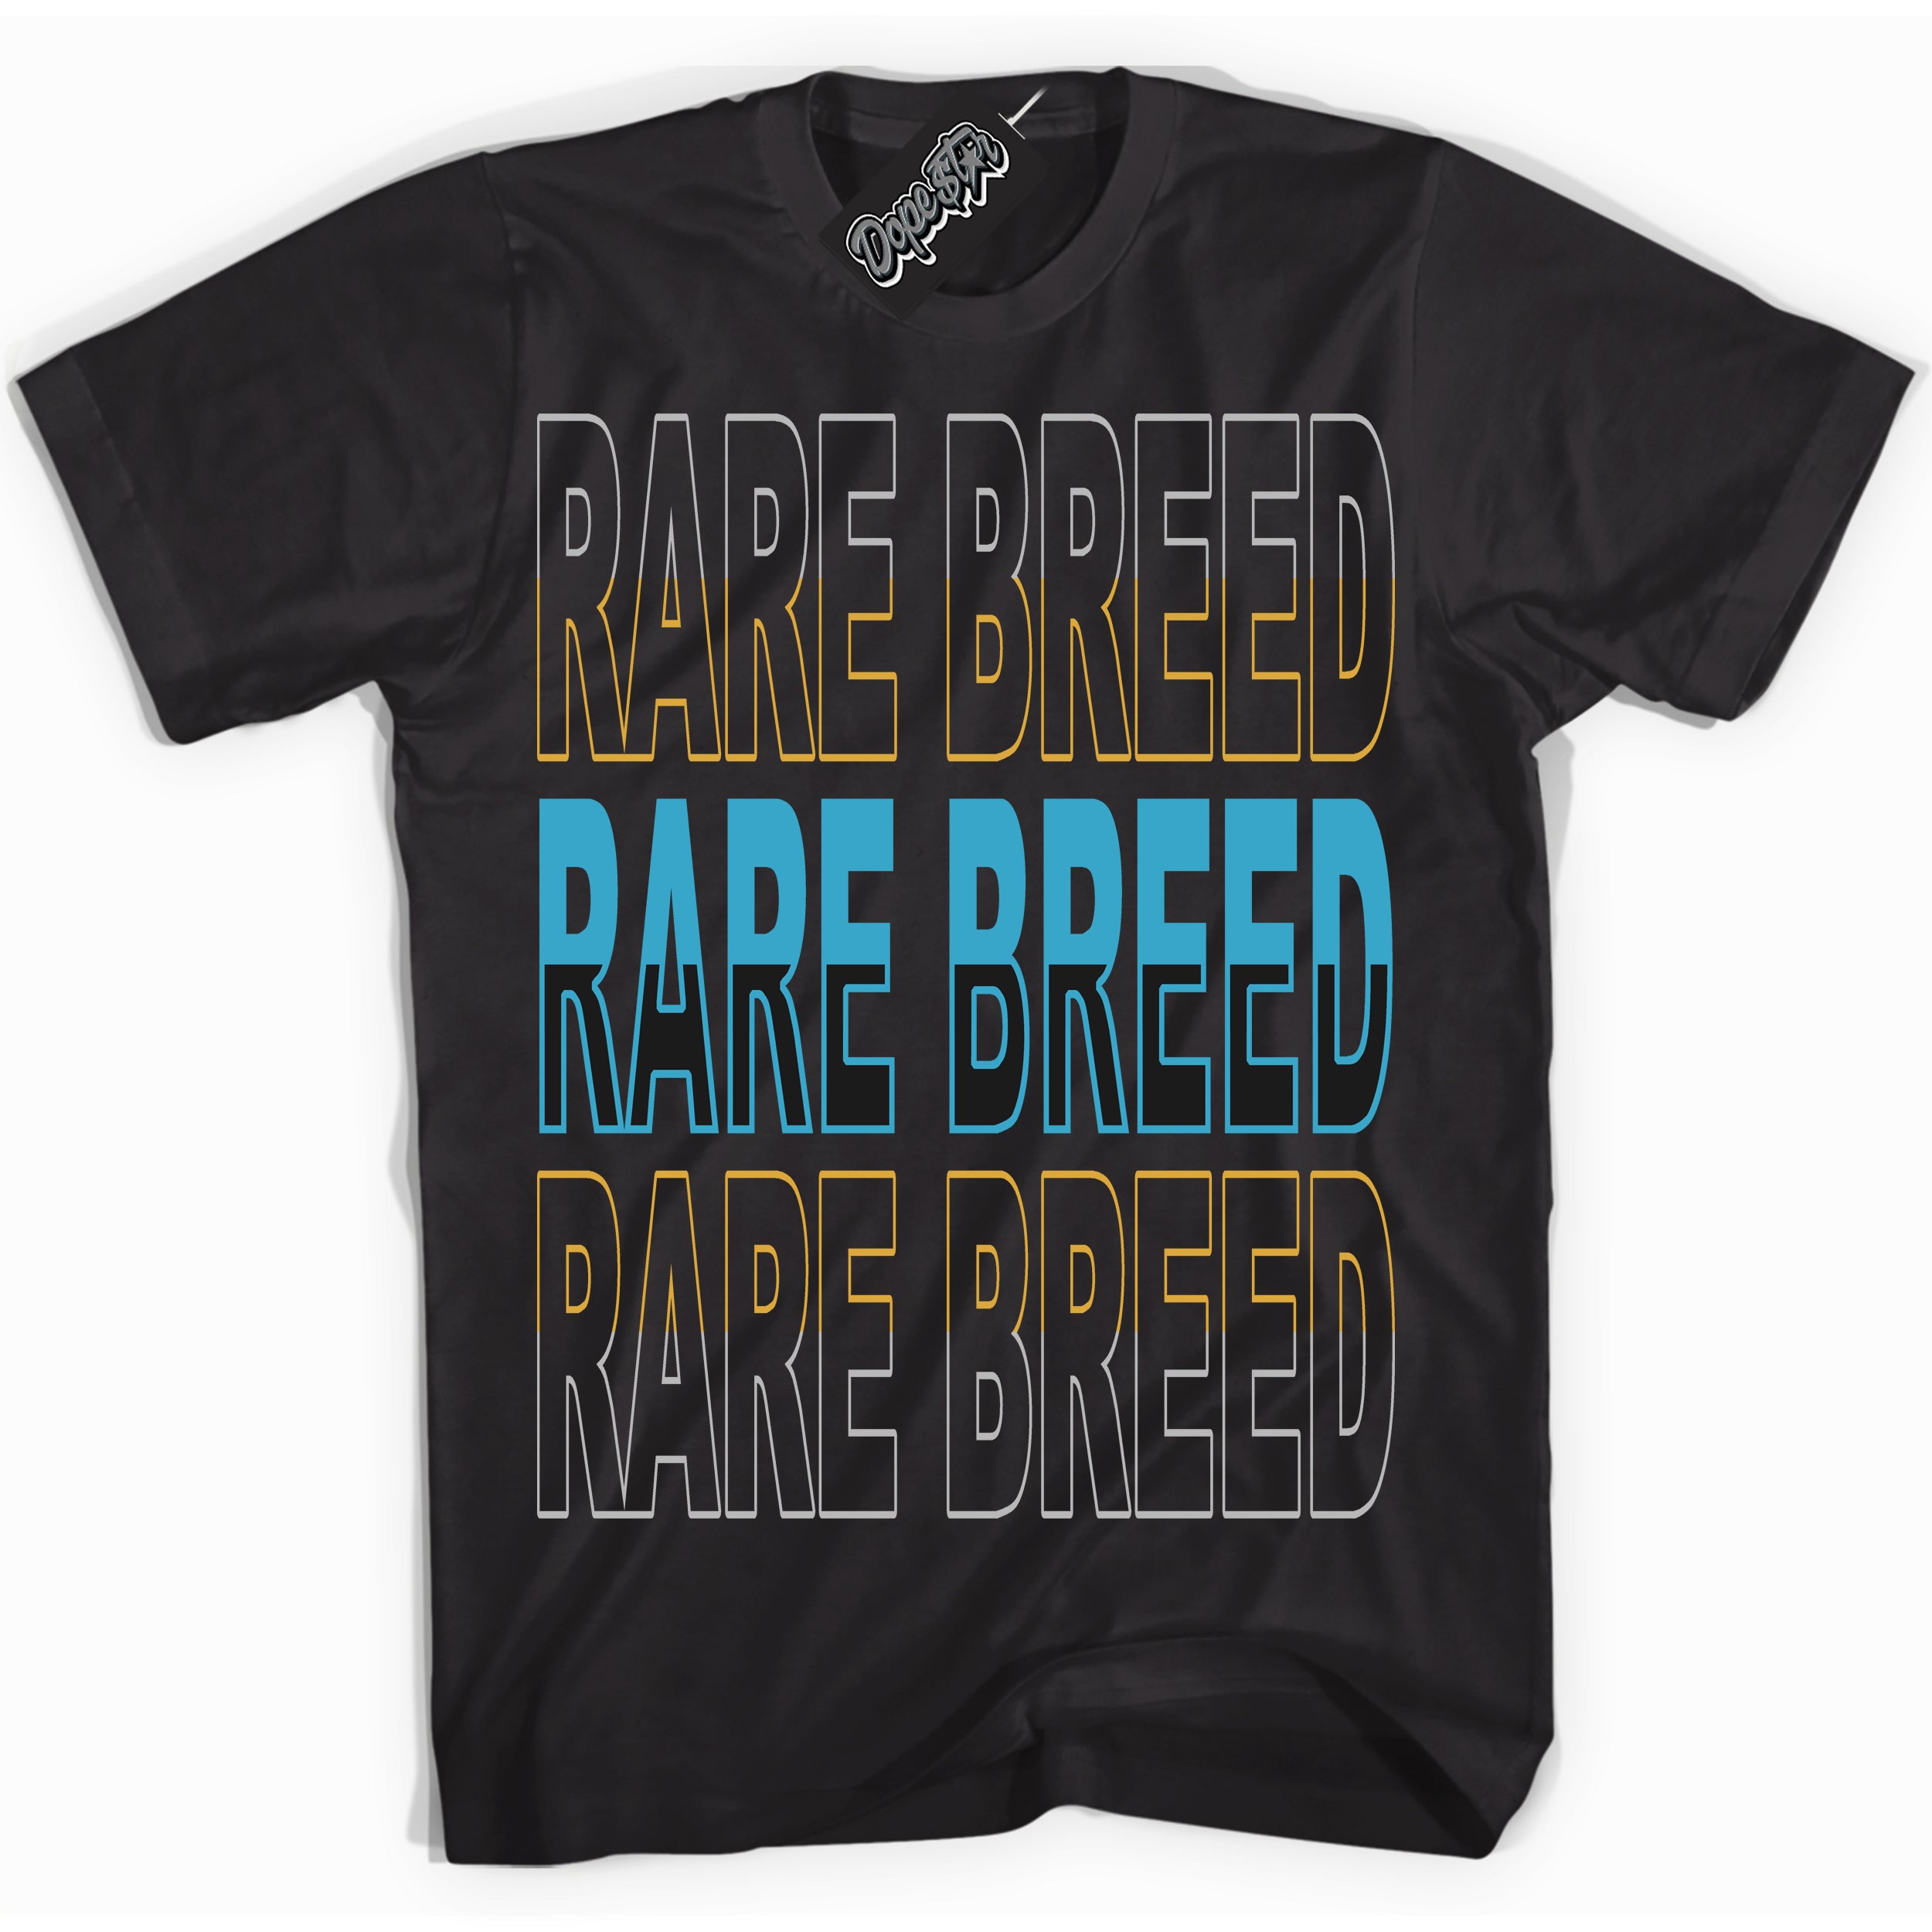 Cool Black Shirt with “ Rare Breed” design that perfectly matches Aqua 5s Sneakers.